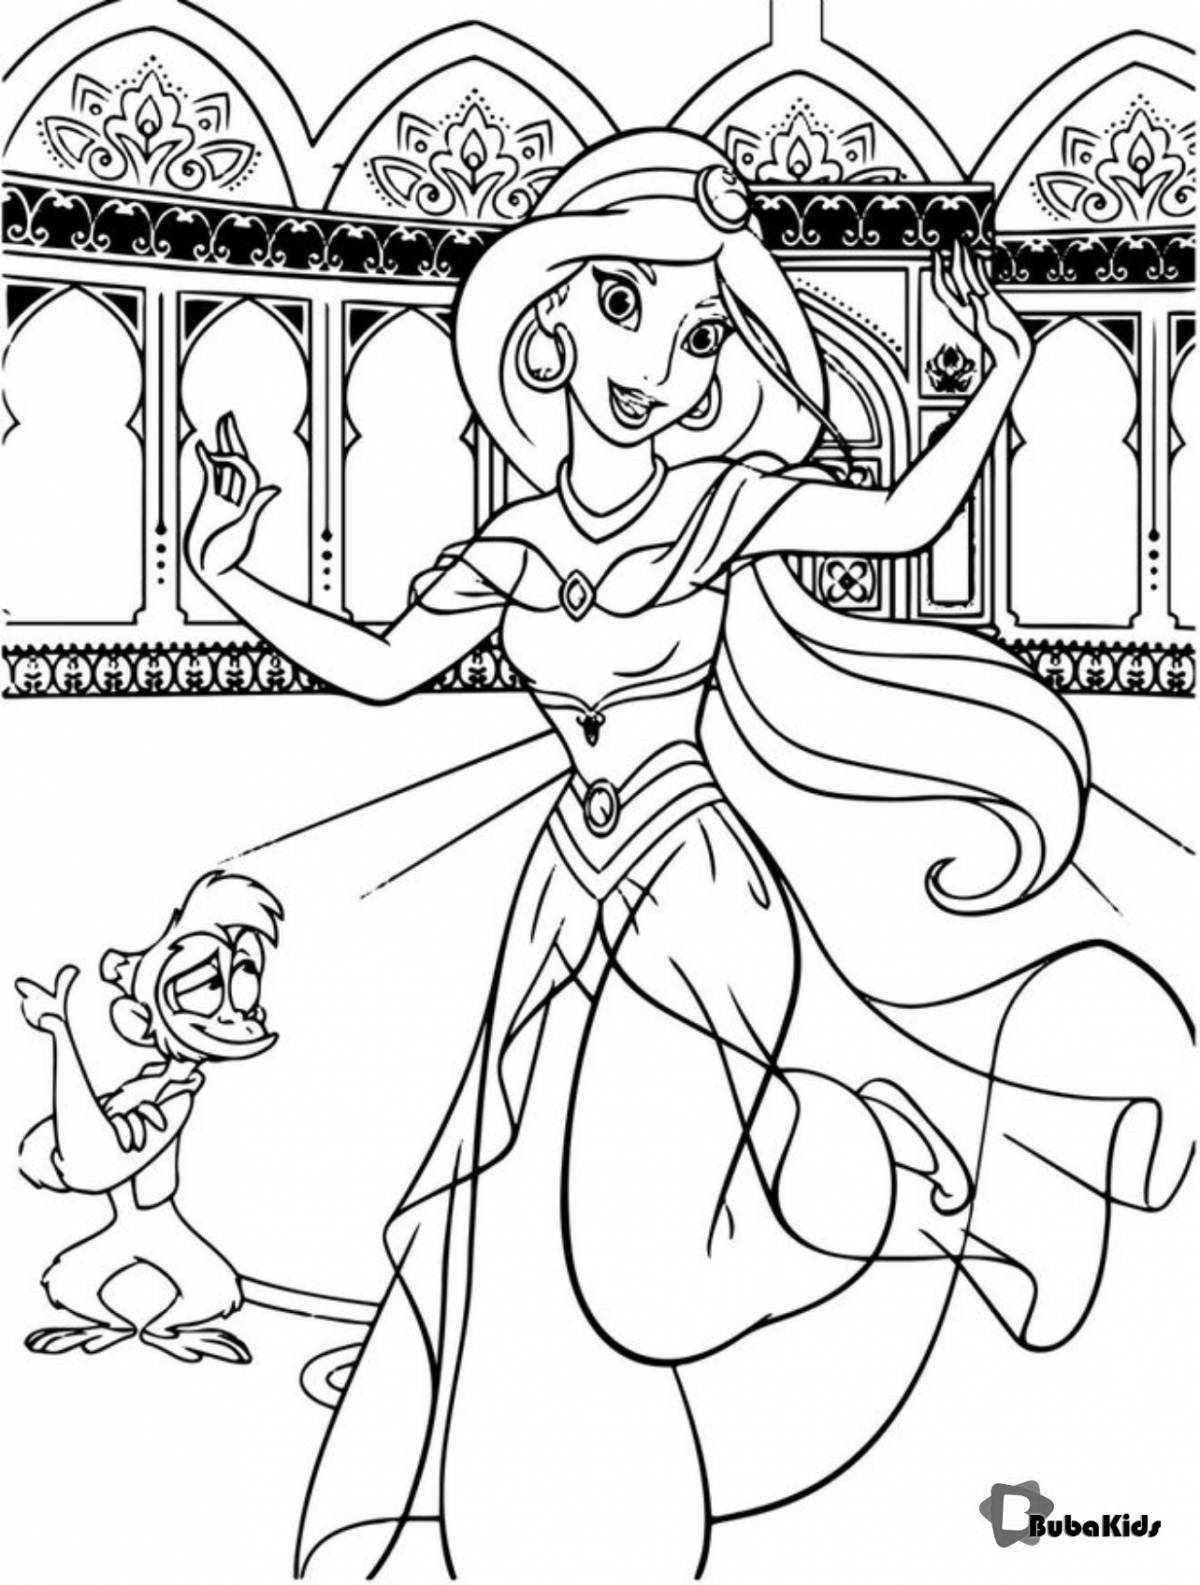 Majestic princess coloring pages